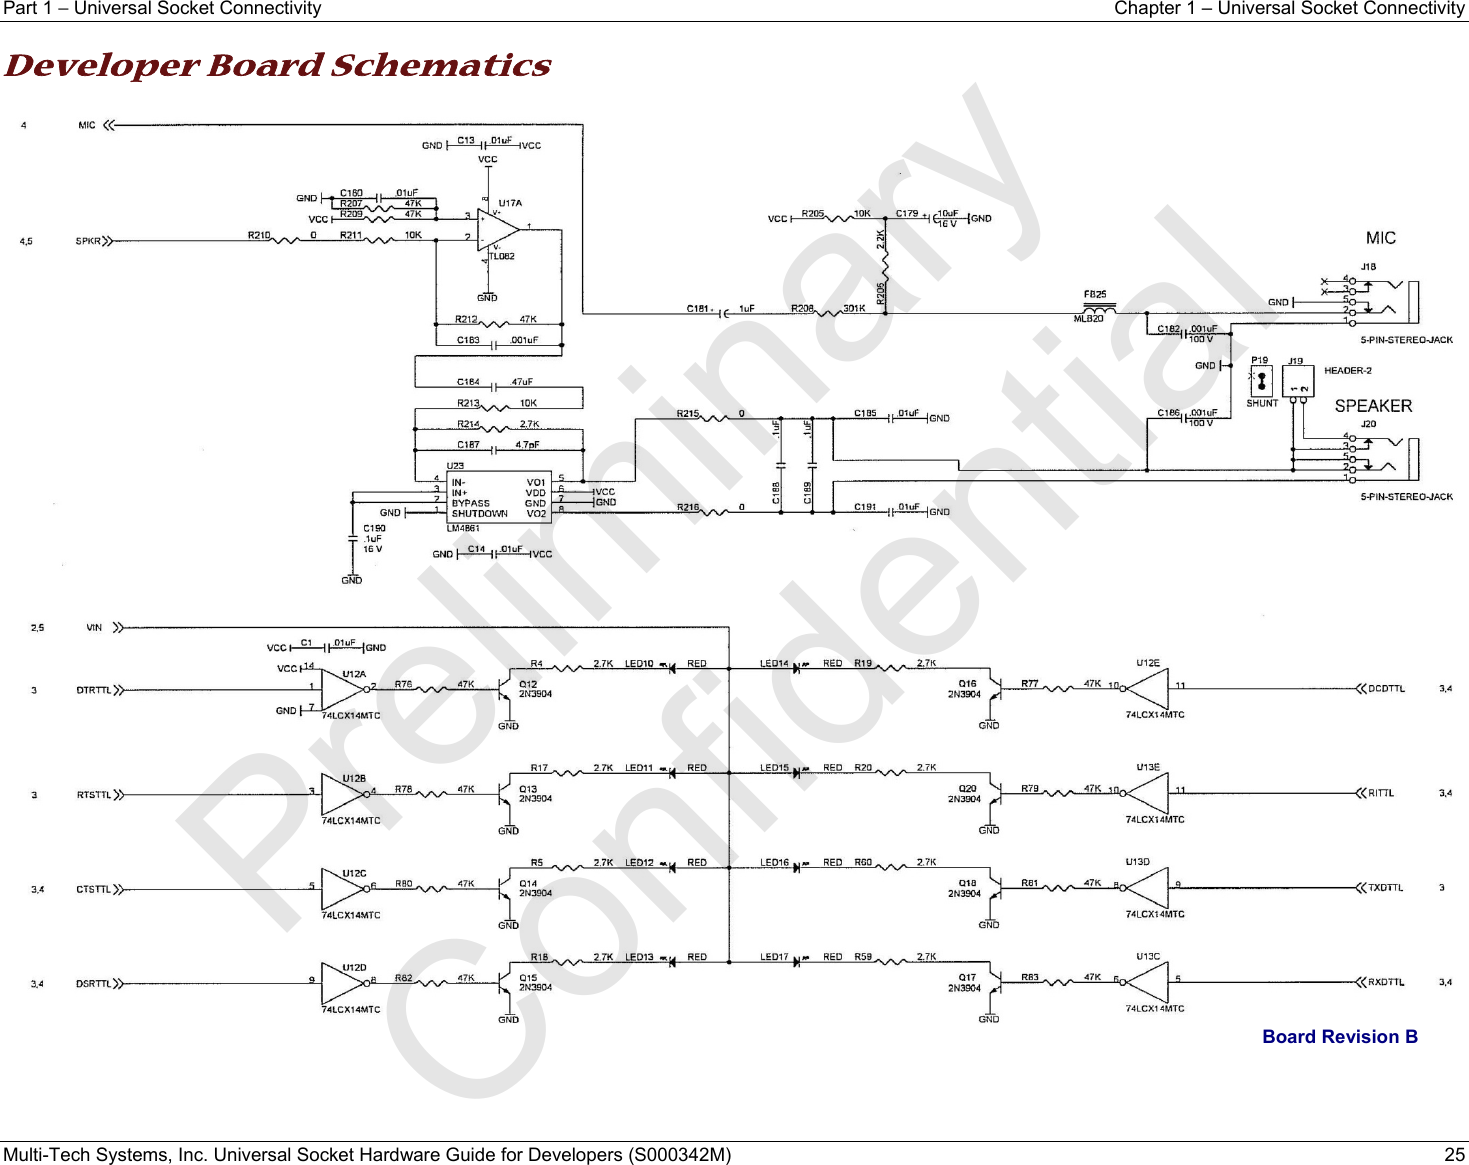 Part 1 − Universal Socket Connectivity  Chapter 1 – Universal Socket Connectivity Multi-Tech Systems, Inc. Universal Socket Hardware Guide for Developers (S000342M)  25  Developer Board Schematics   Board Revision B   Preliminary  Confidential